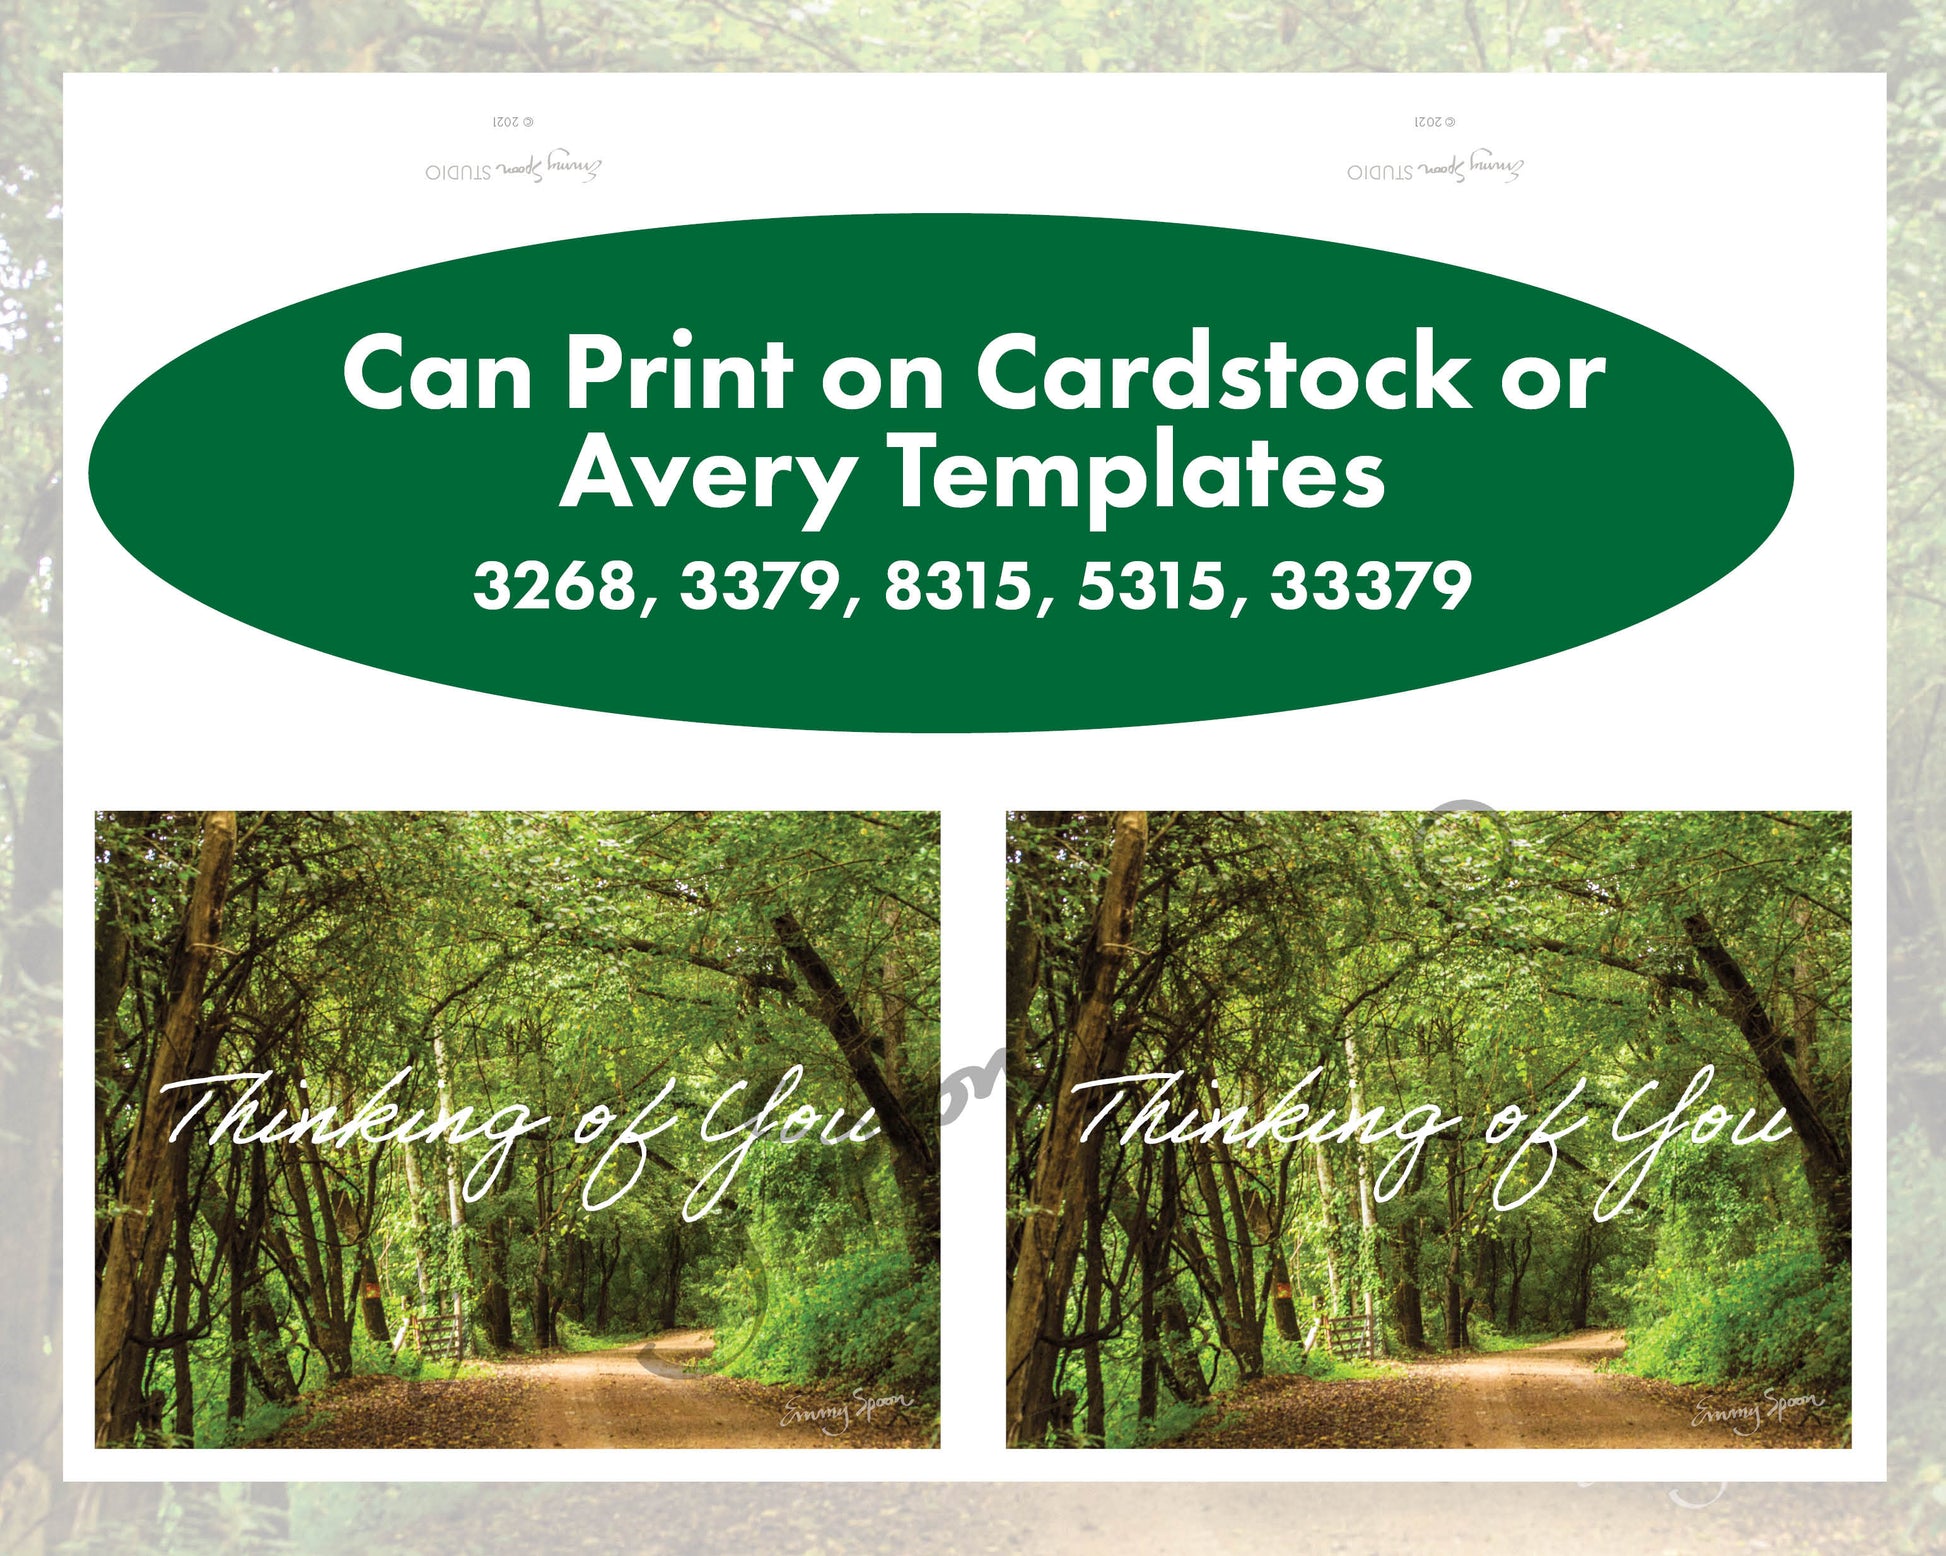 Can Print on Cardstock or Avery Templates, 3268, 3379, 8315 or 33379. Thinking of You